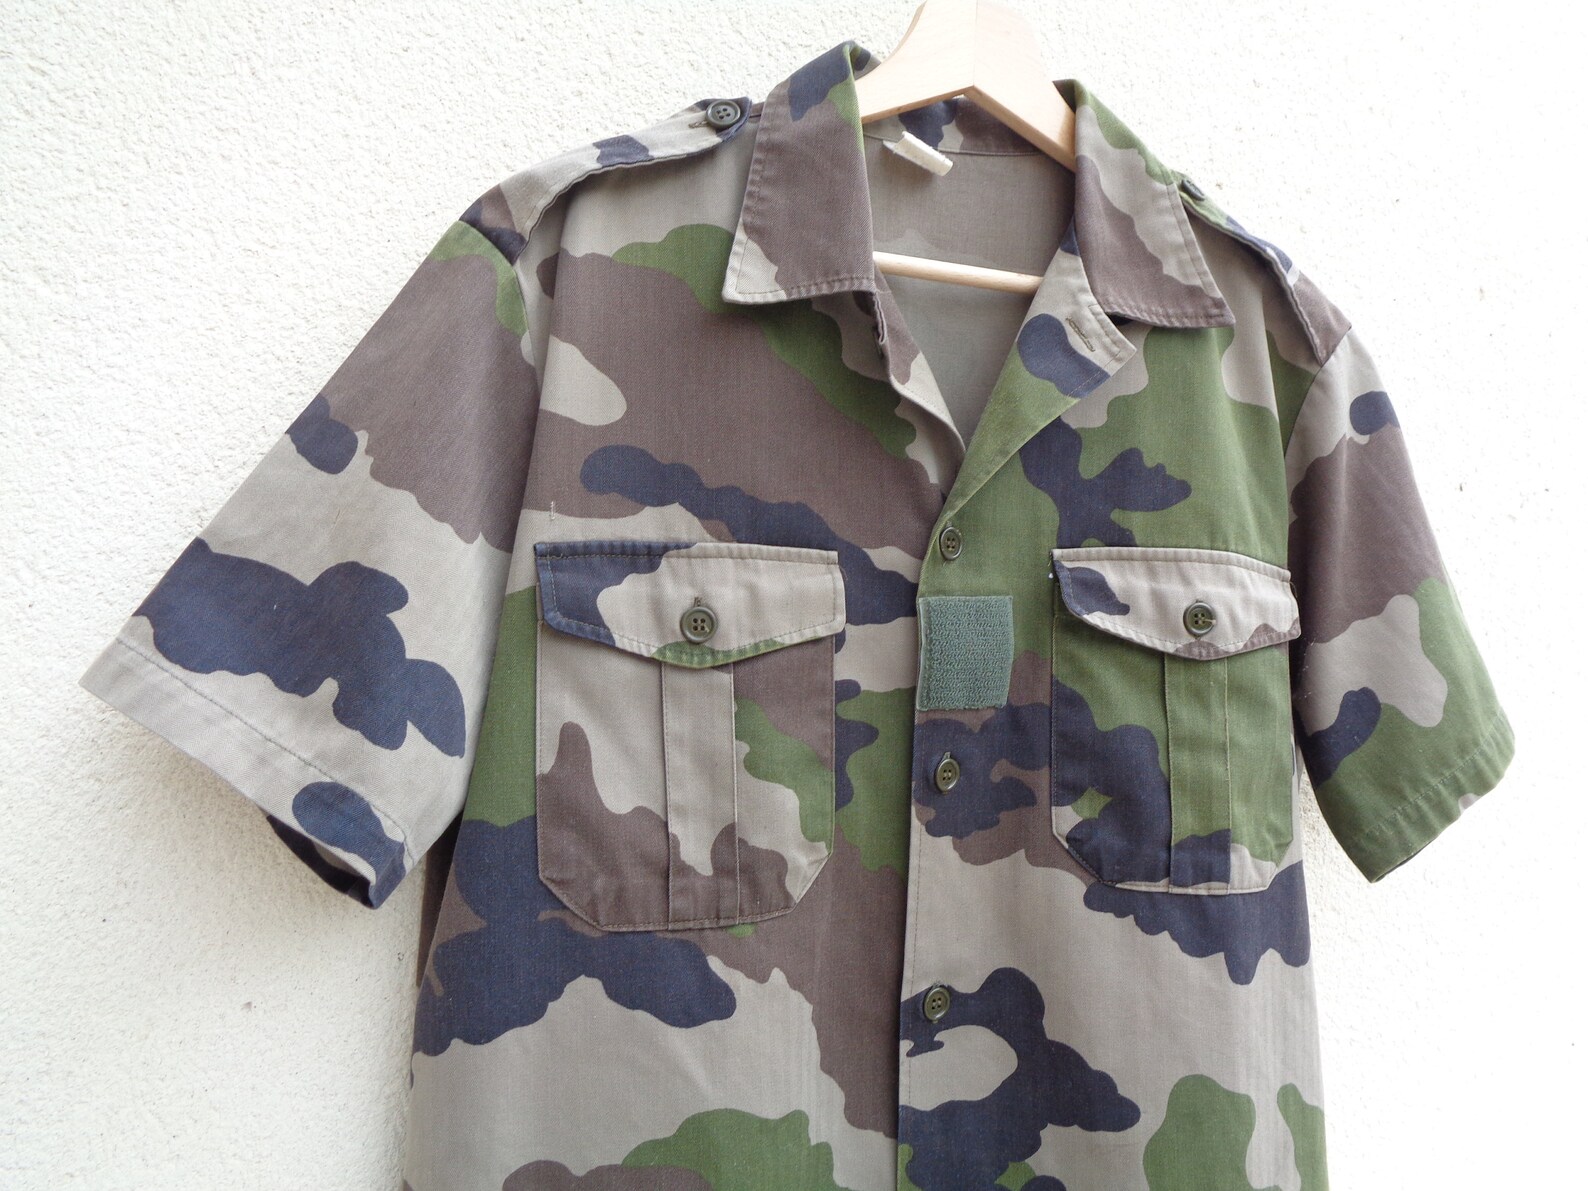 Vintage French Army Camouflage Shirt Size M 39/40 Military - Etsy